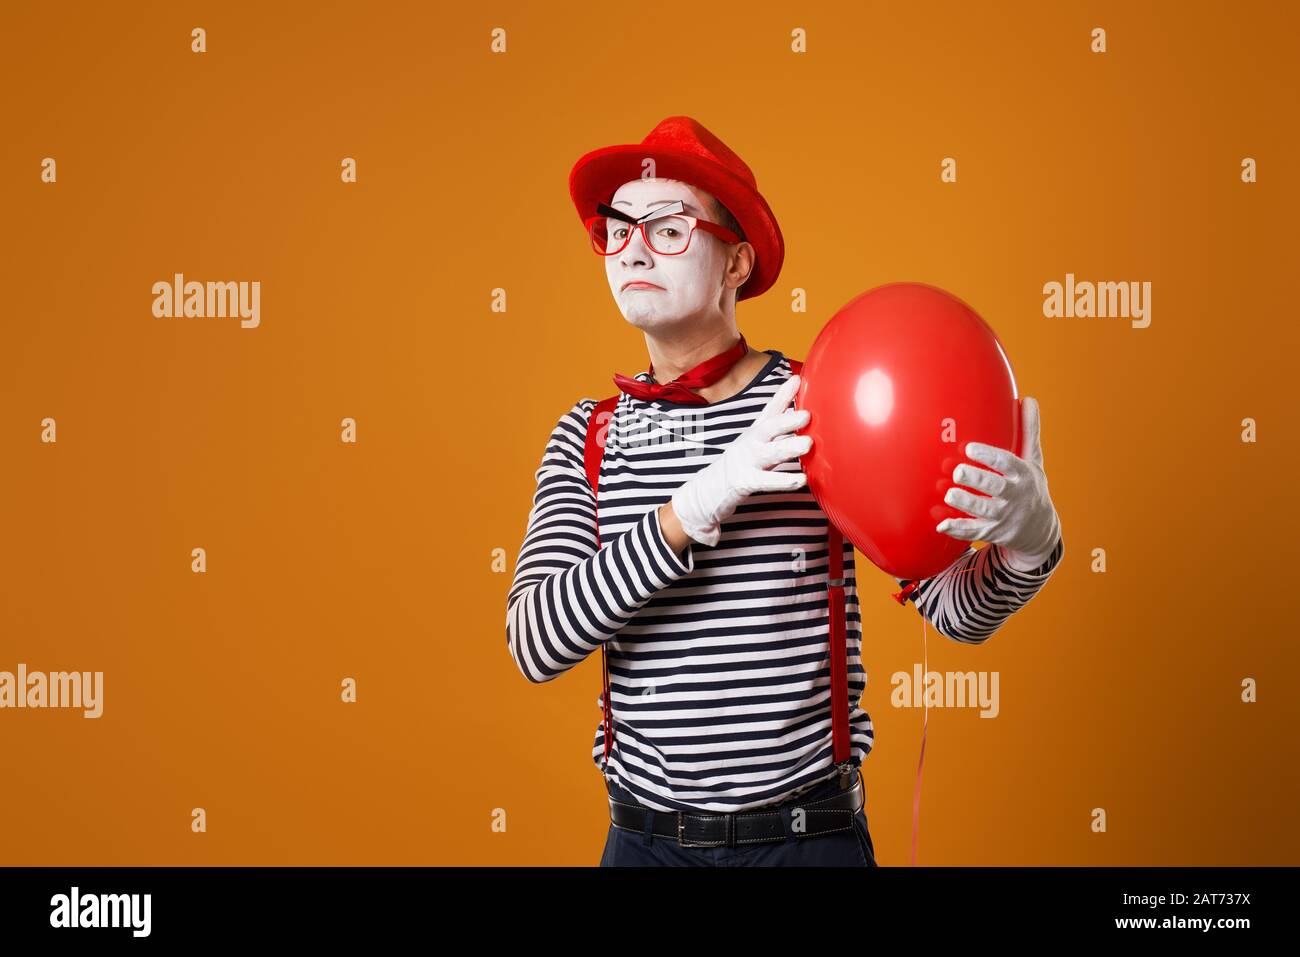 Sad clown in vest and red hat with balloon in his hand on orange empty background Stock Photo